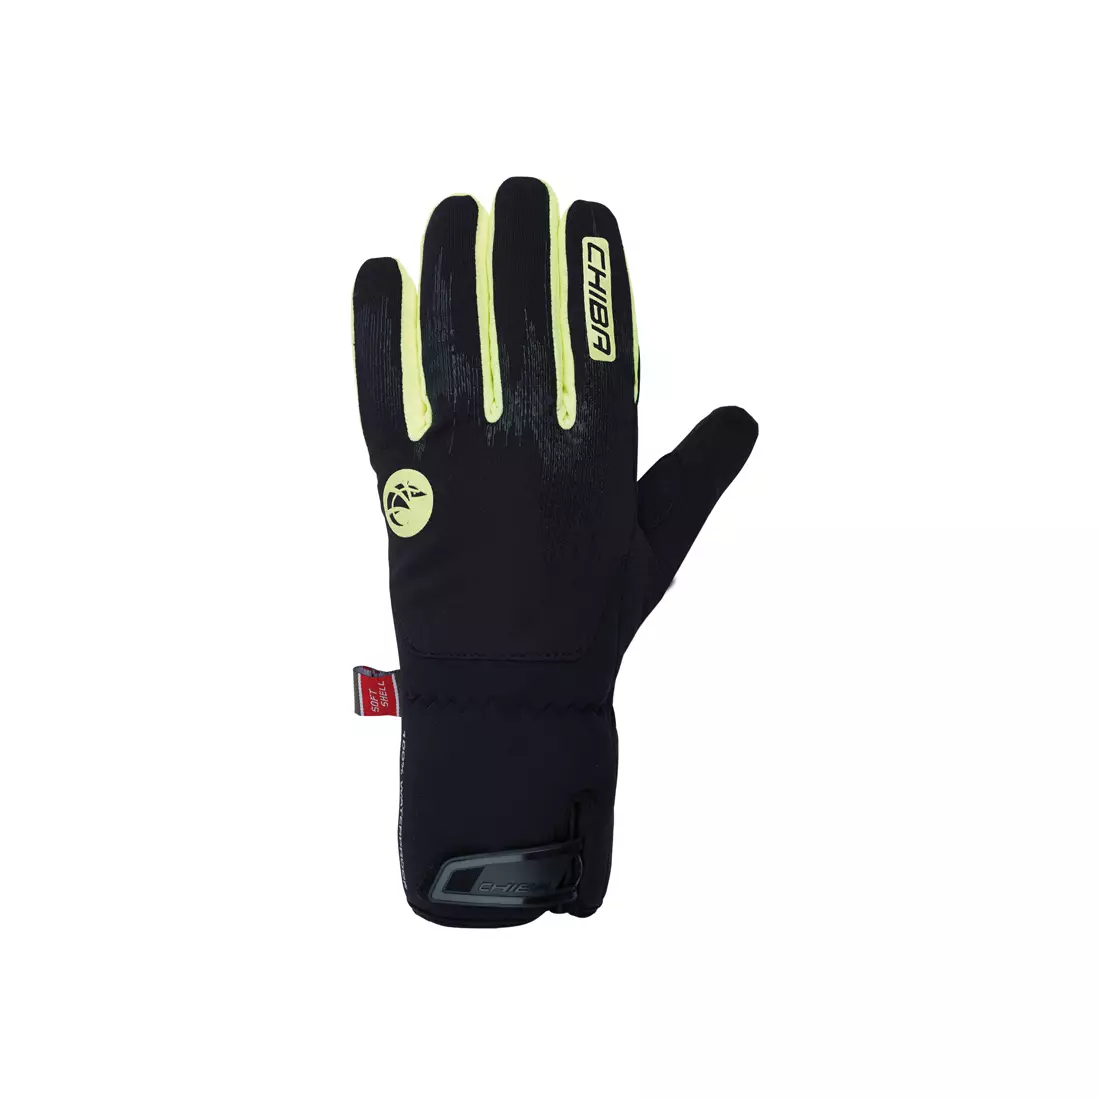 CHIBA DRY STAR SUPERLIGHT winter gloves for cycling, black-fluor yellow 31217